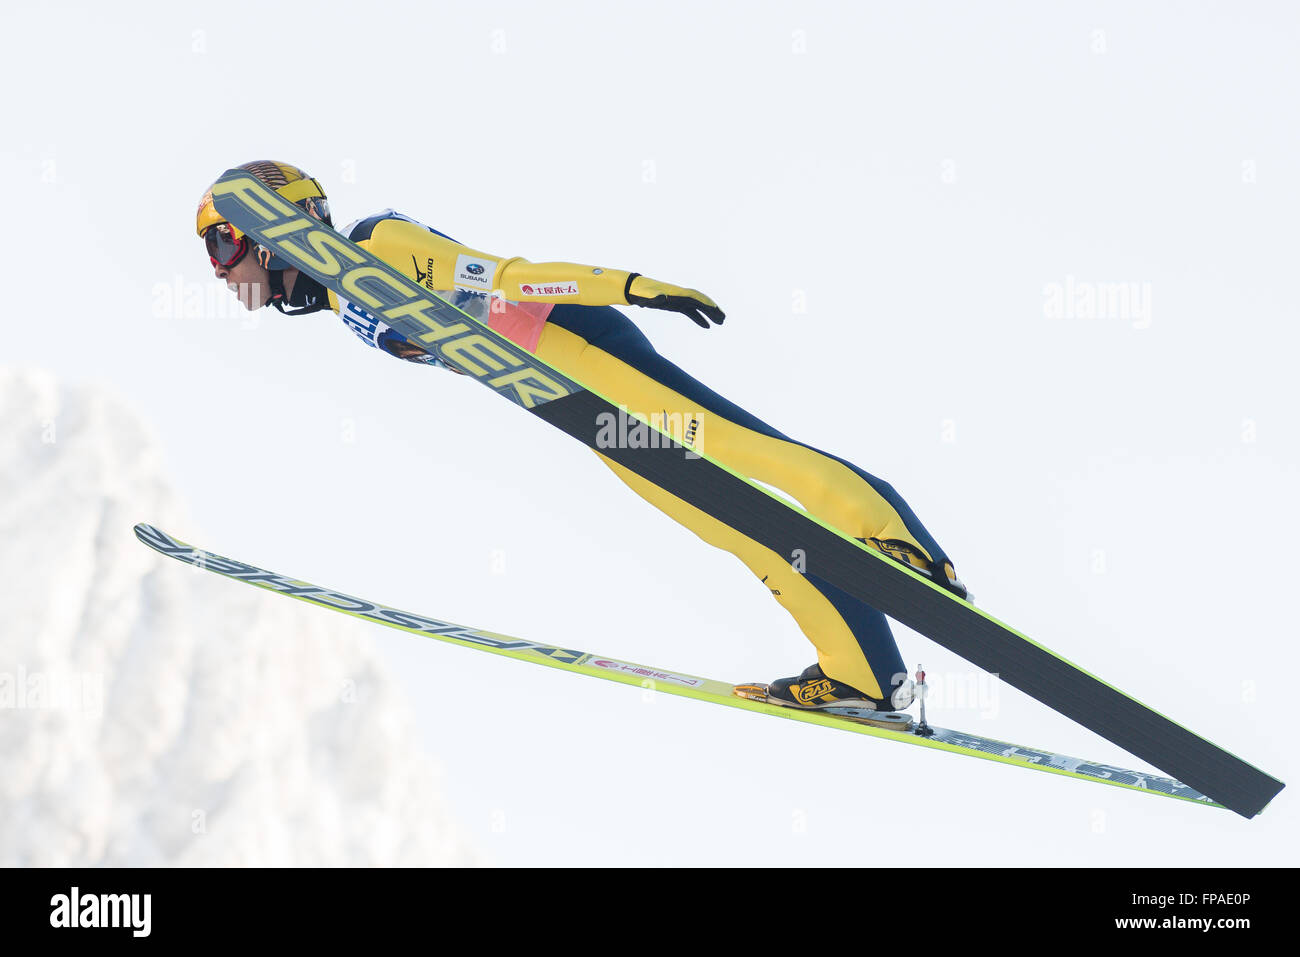 Planica, Slovenia. 18th Mar, 2016. Noriaki Kasai of Japan competes during Planica FIS Ski Jumping World Cup final on the March 18, 2016 in Planica, Slovenia. © Rok Rakun/Pacific Press/Alamy Live News Stock Photo